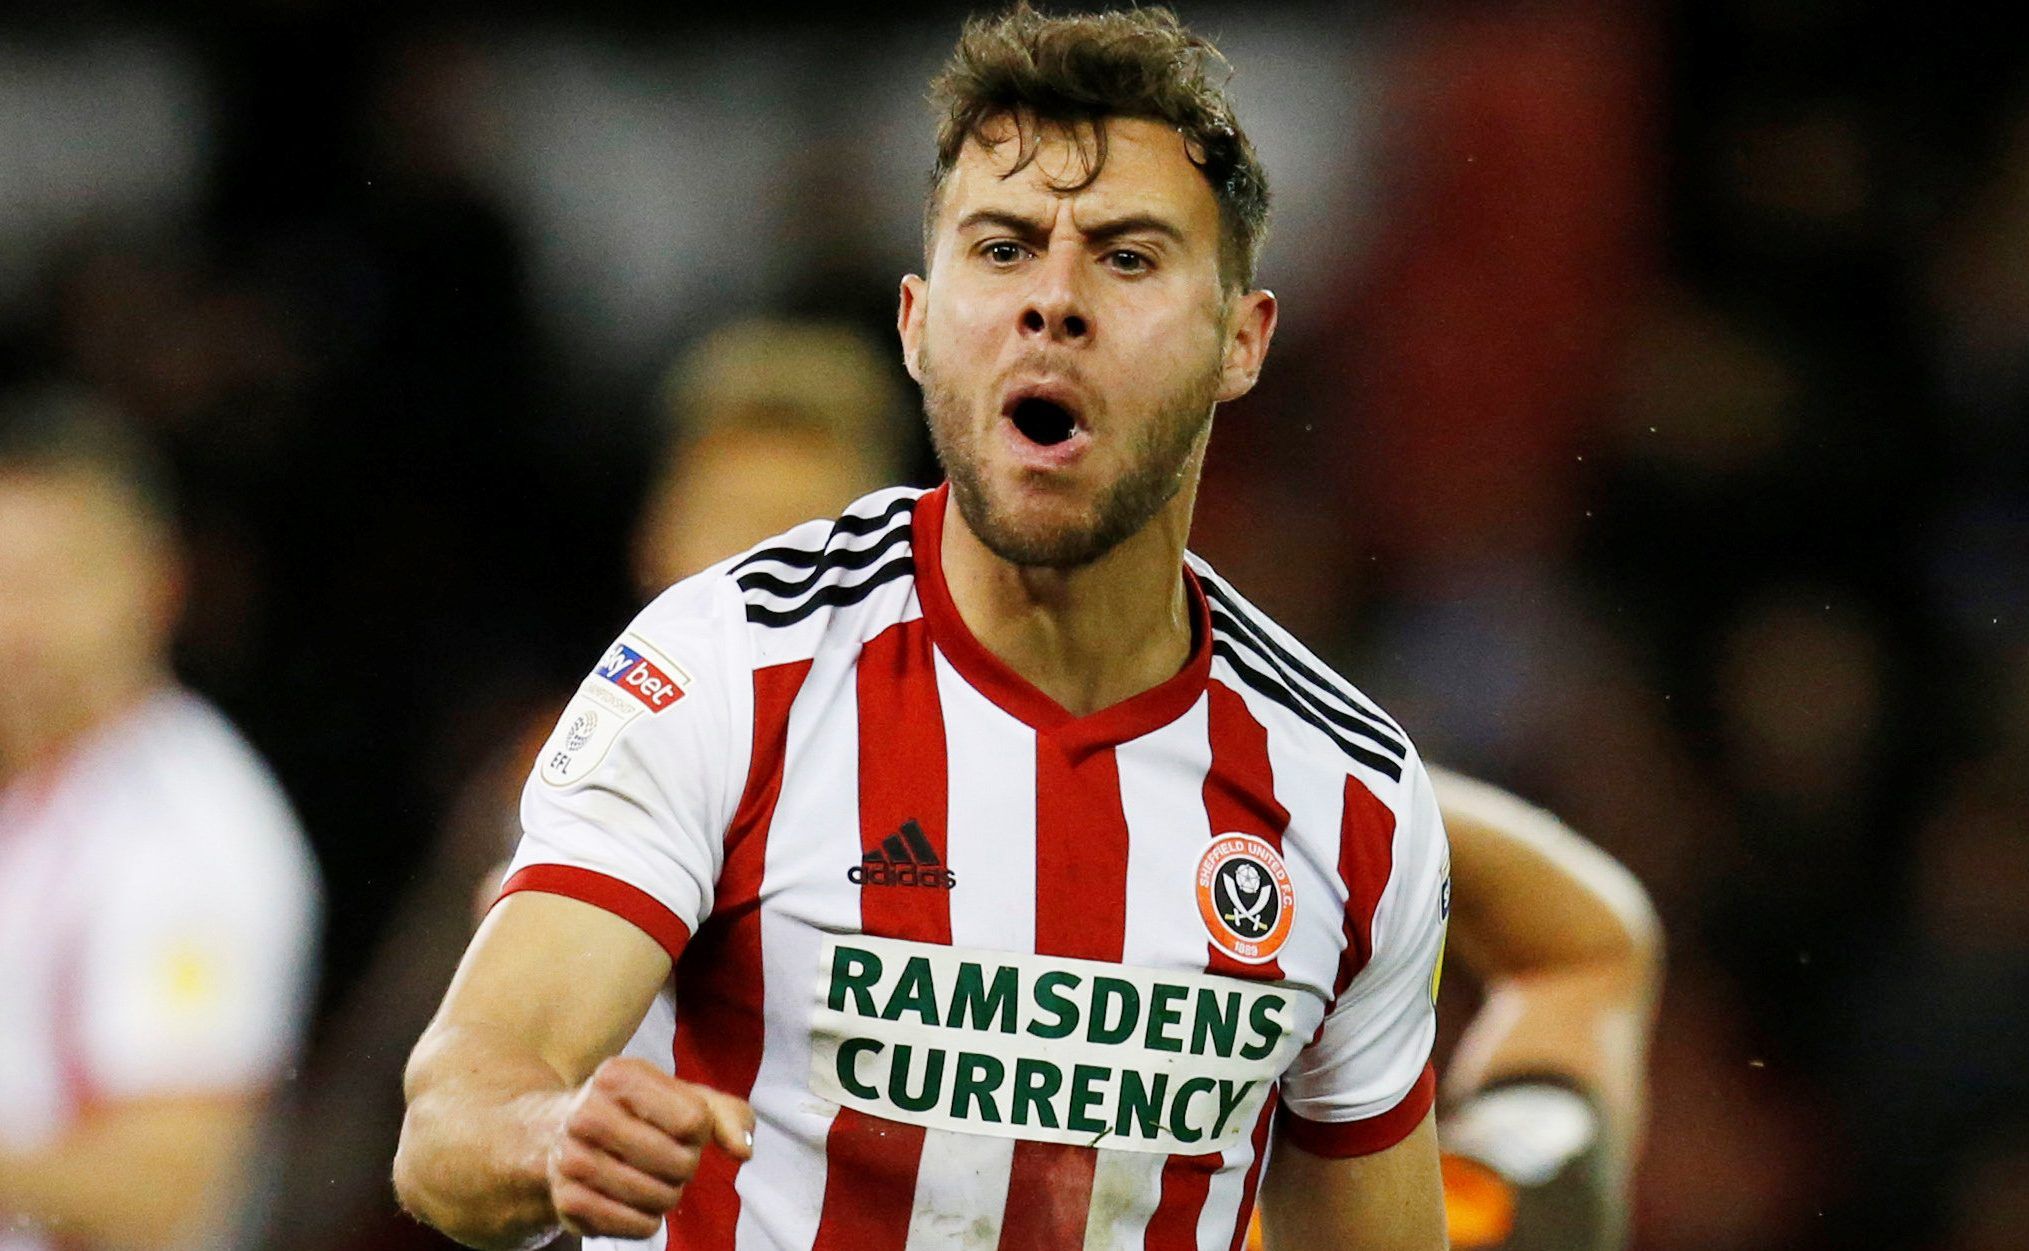 Soccer Football - Championship - Sheffield United v Brentford - Bramall Lane, Sheffield, Britain - March 12, 2019  Sheffield United's George Baldock celebrates being awarded a penalty  Action Images/Ed Sykes  EDITORIAL USE ONLY. No use with unauthorized audio, video, data, fixture lists, club/league logos or 